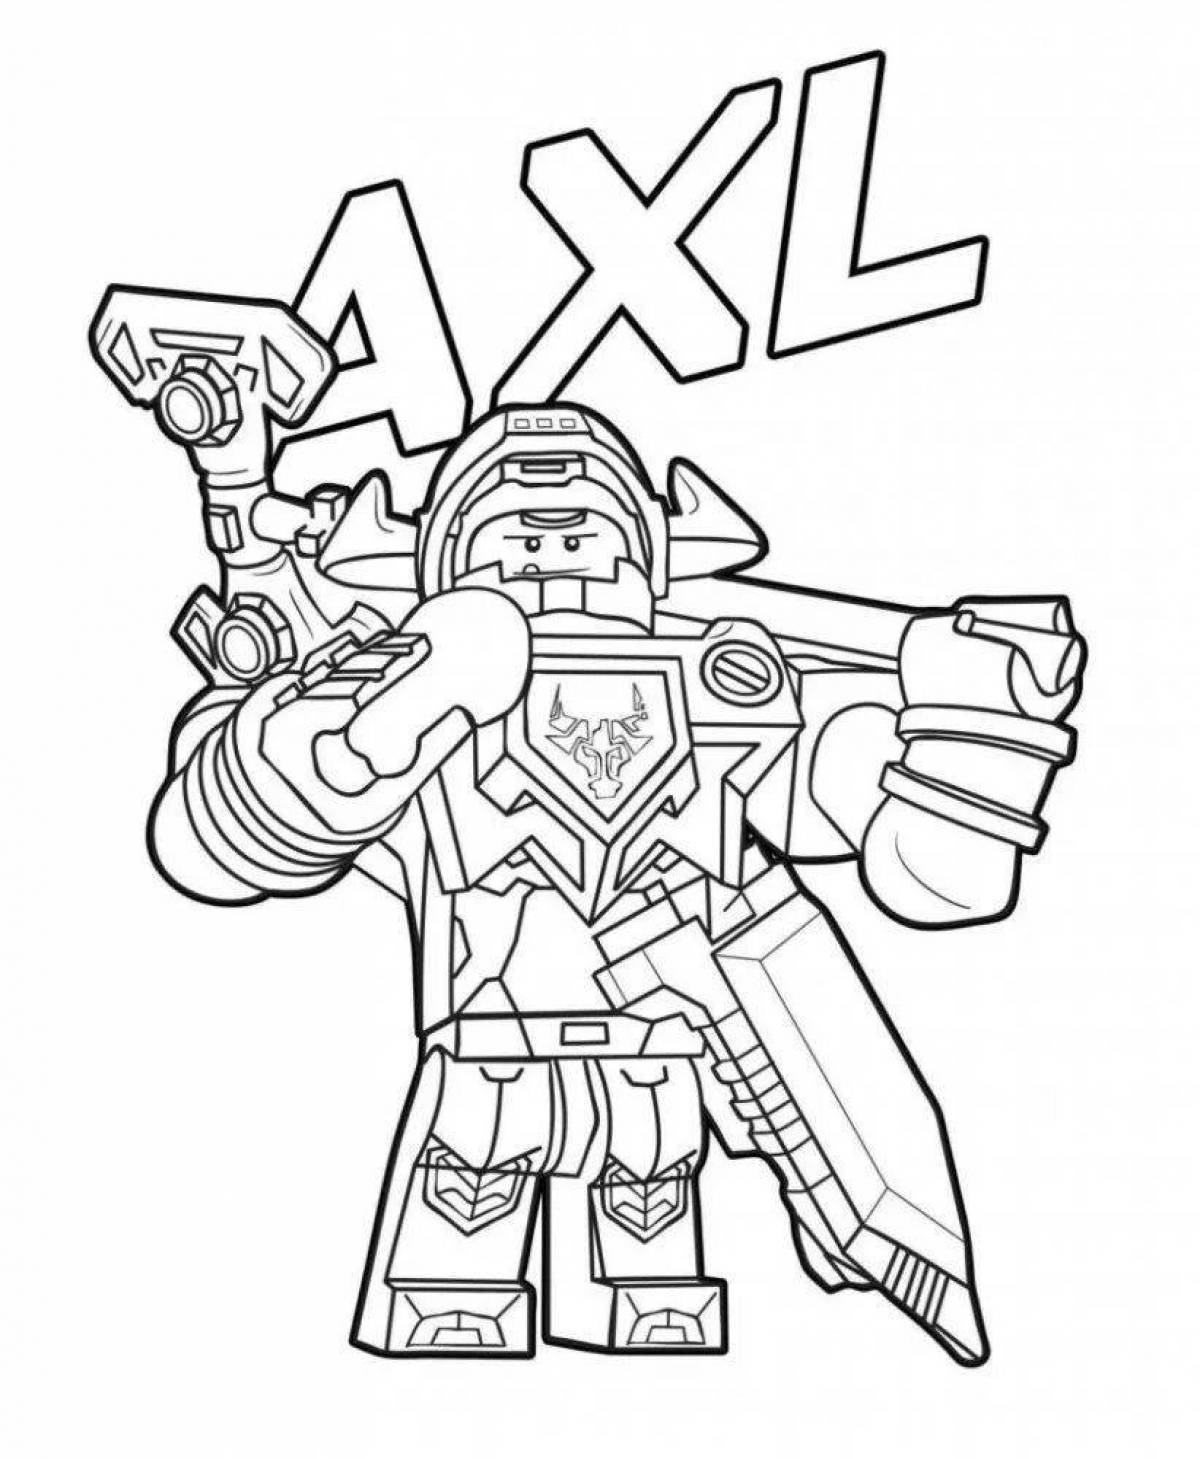 Radiant nexo knights coloring page